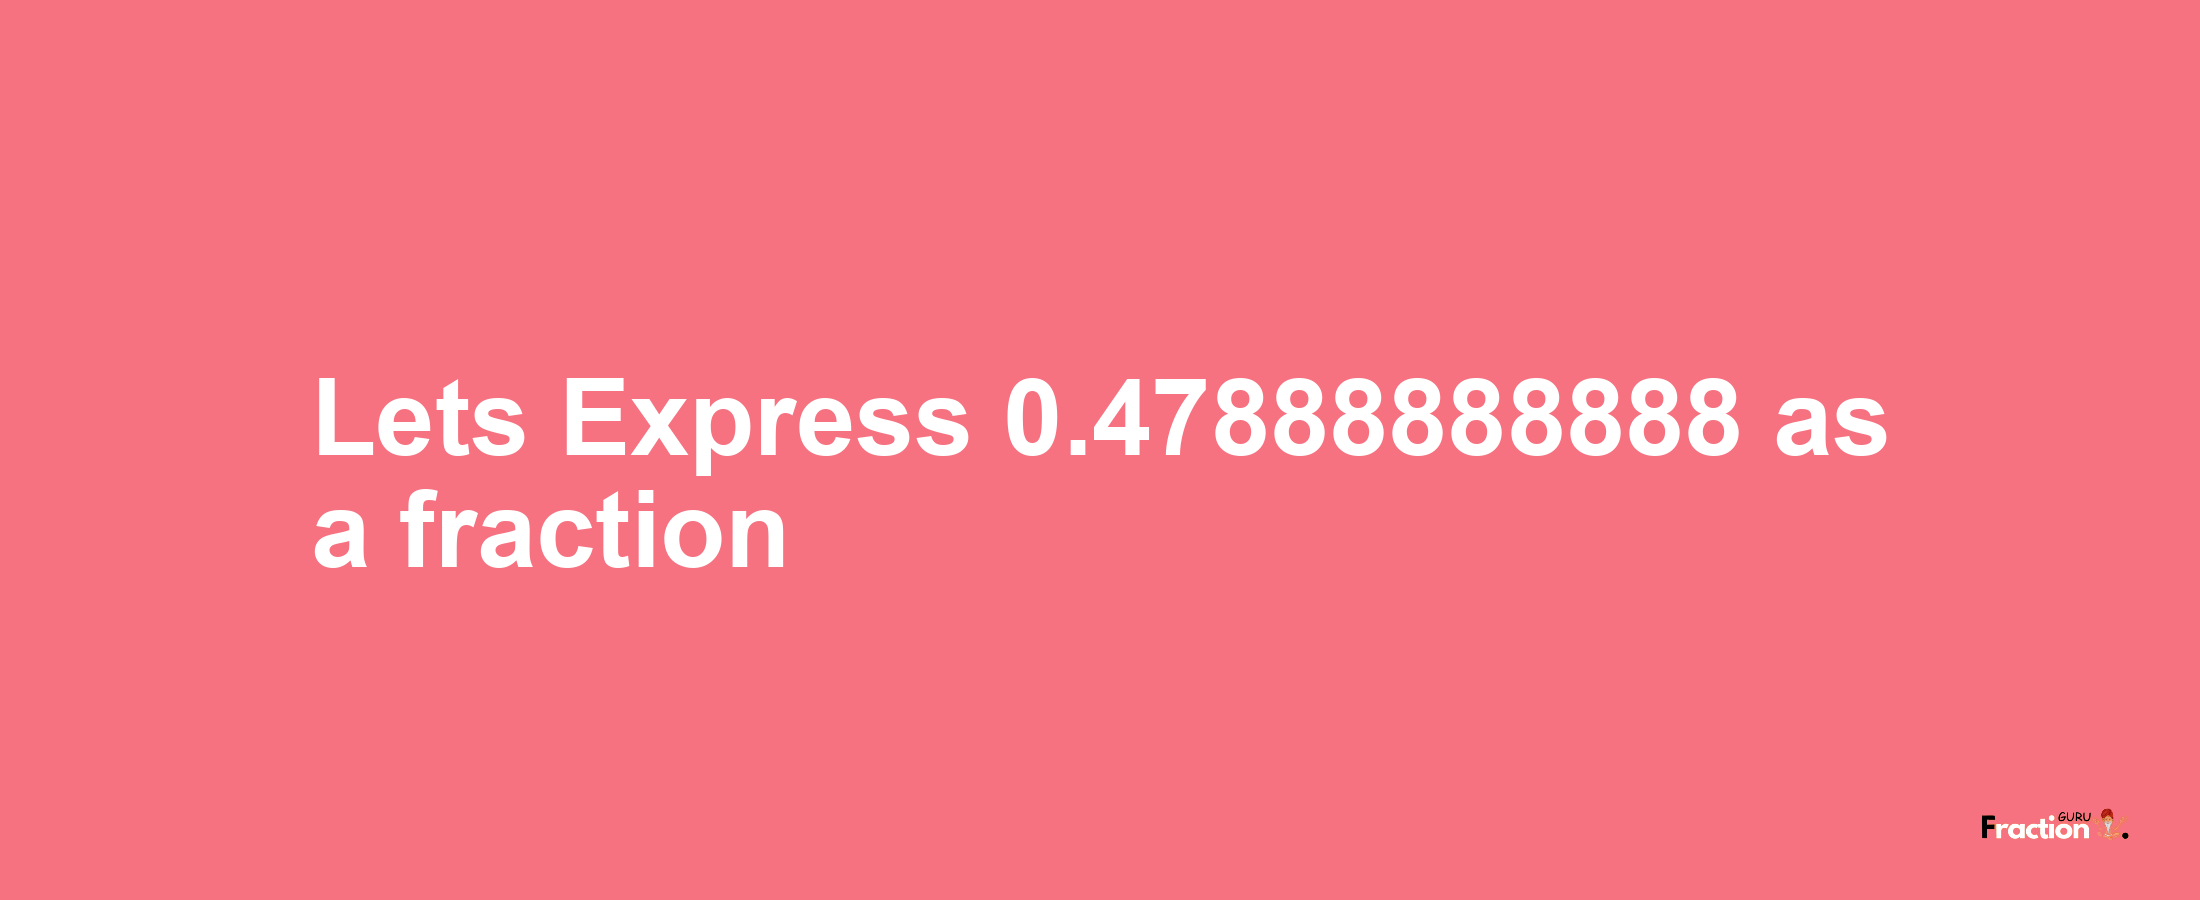 Lets Express 0.47888888888 as afraction